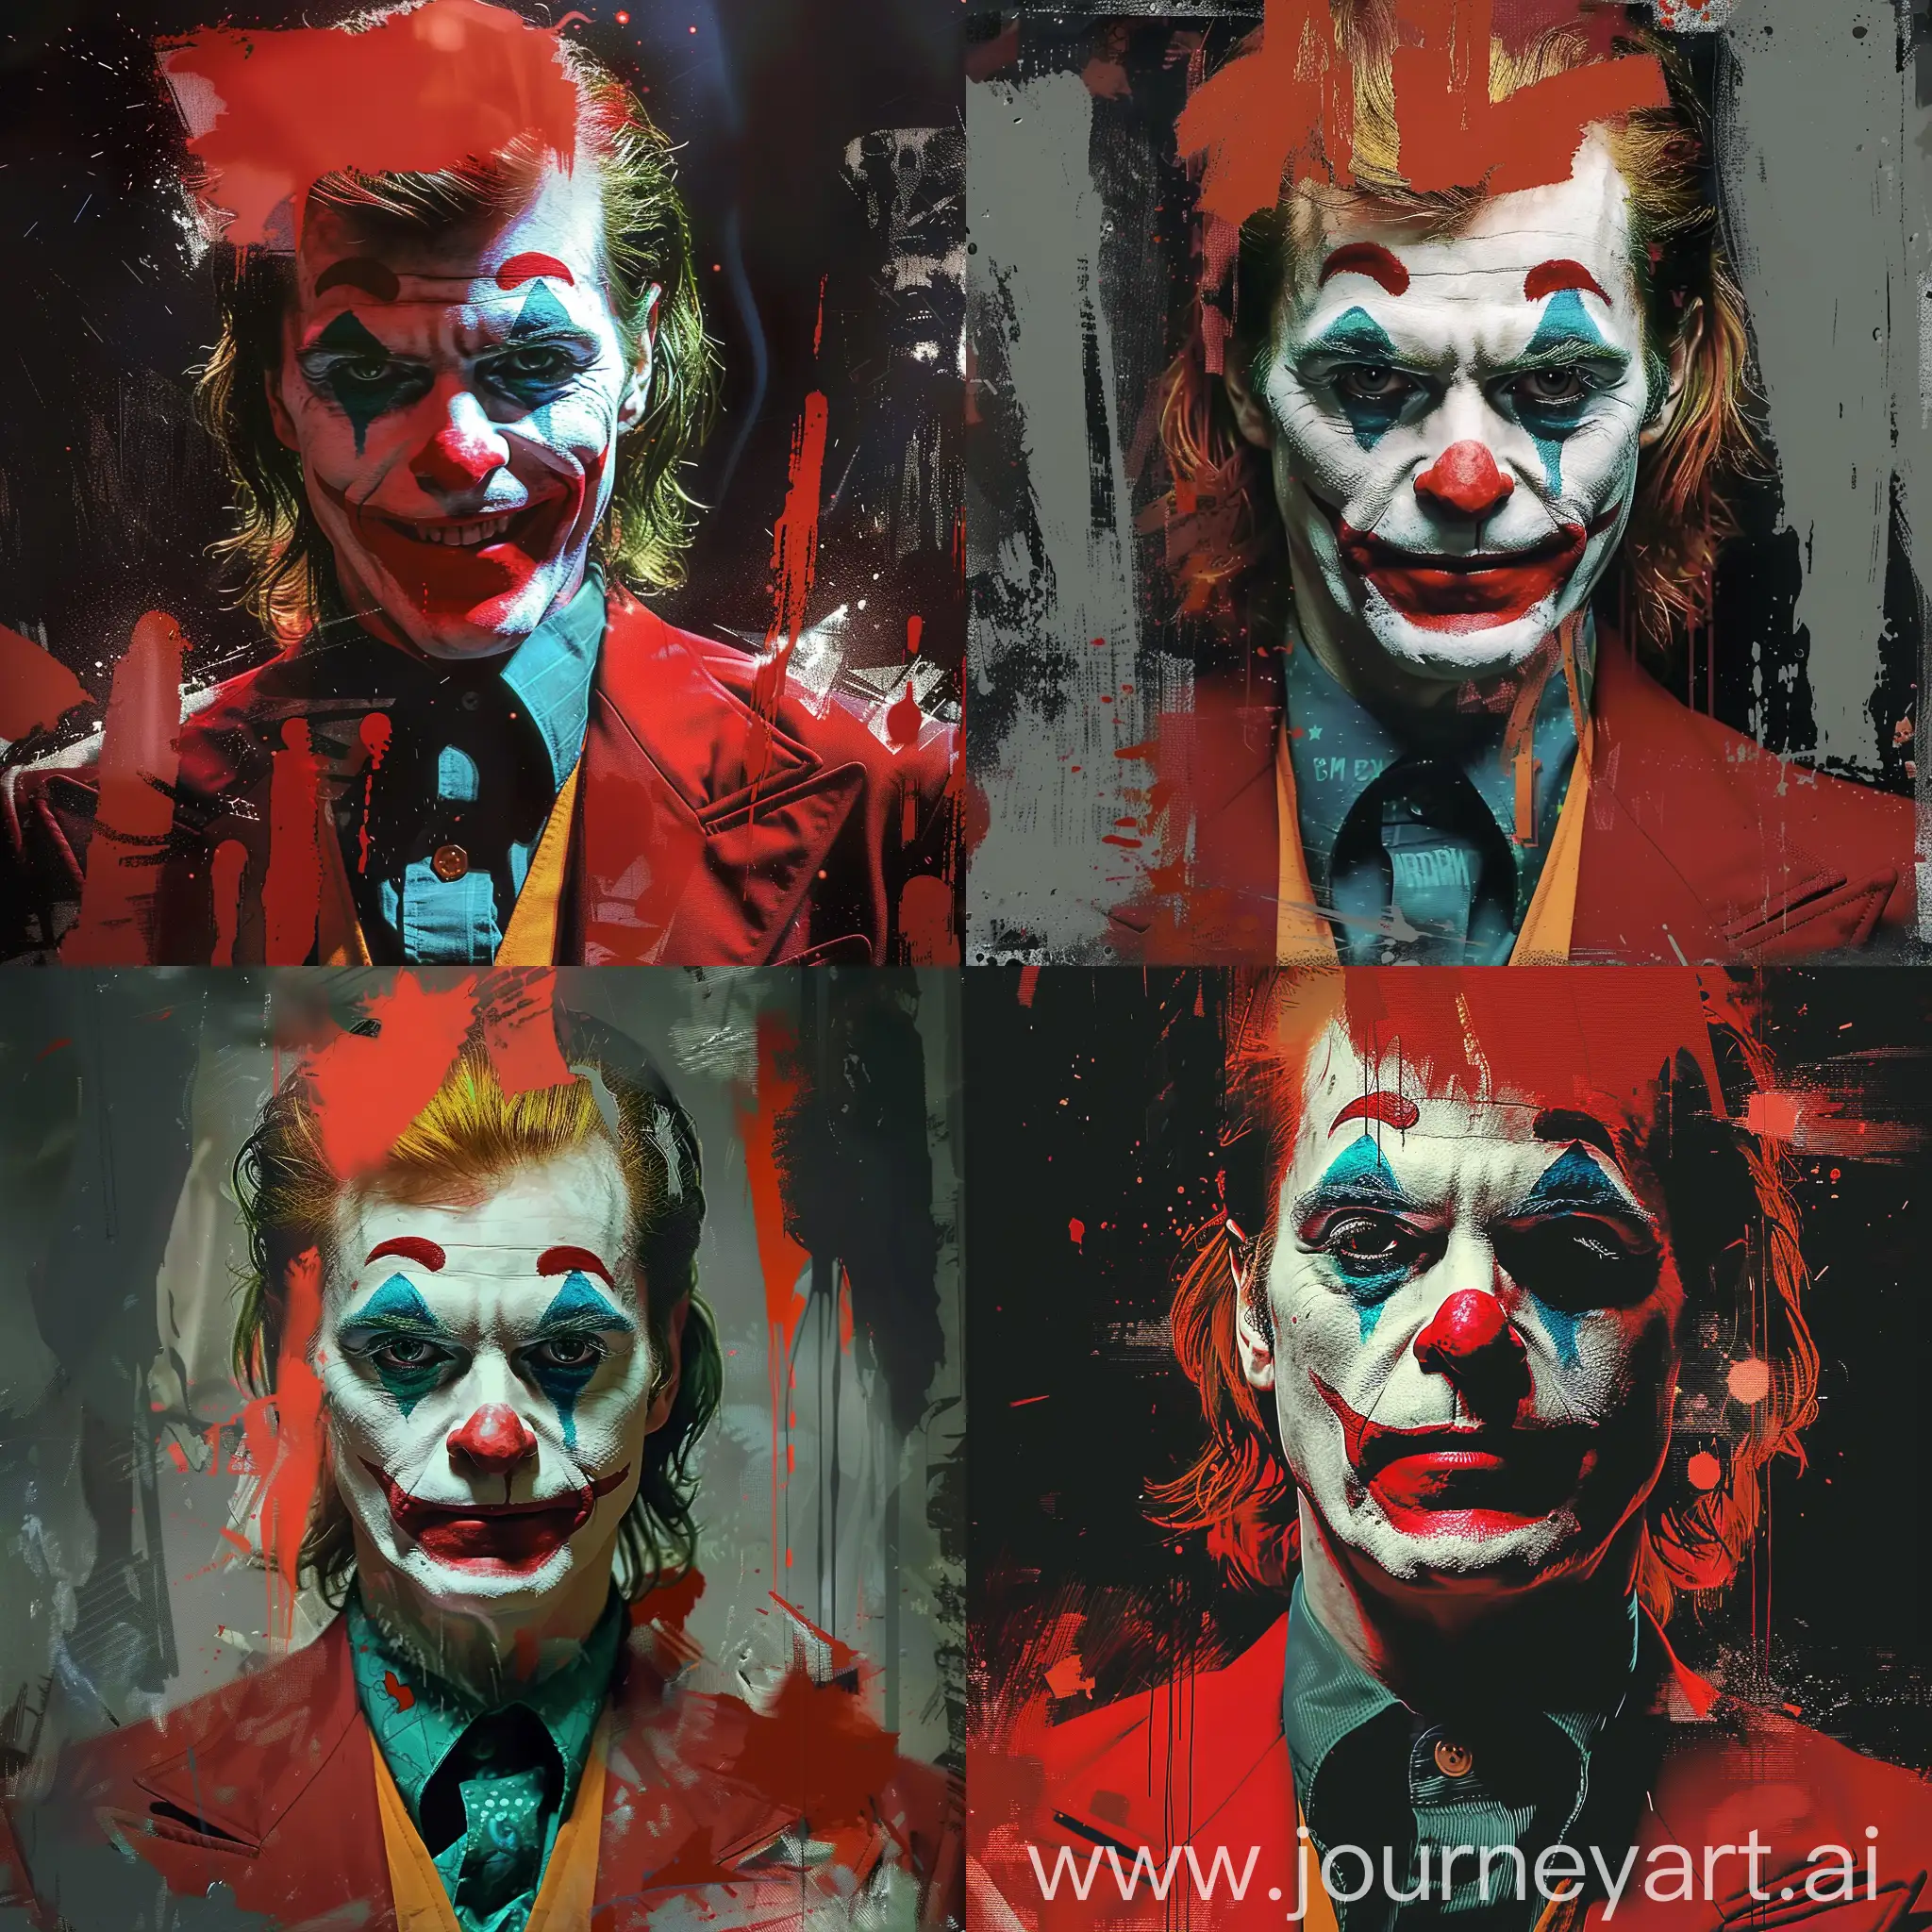 Playful-Joker-Portrait-with-Mysterious-Smile